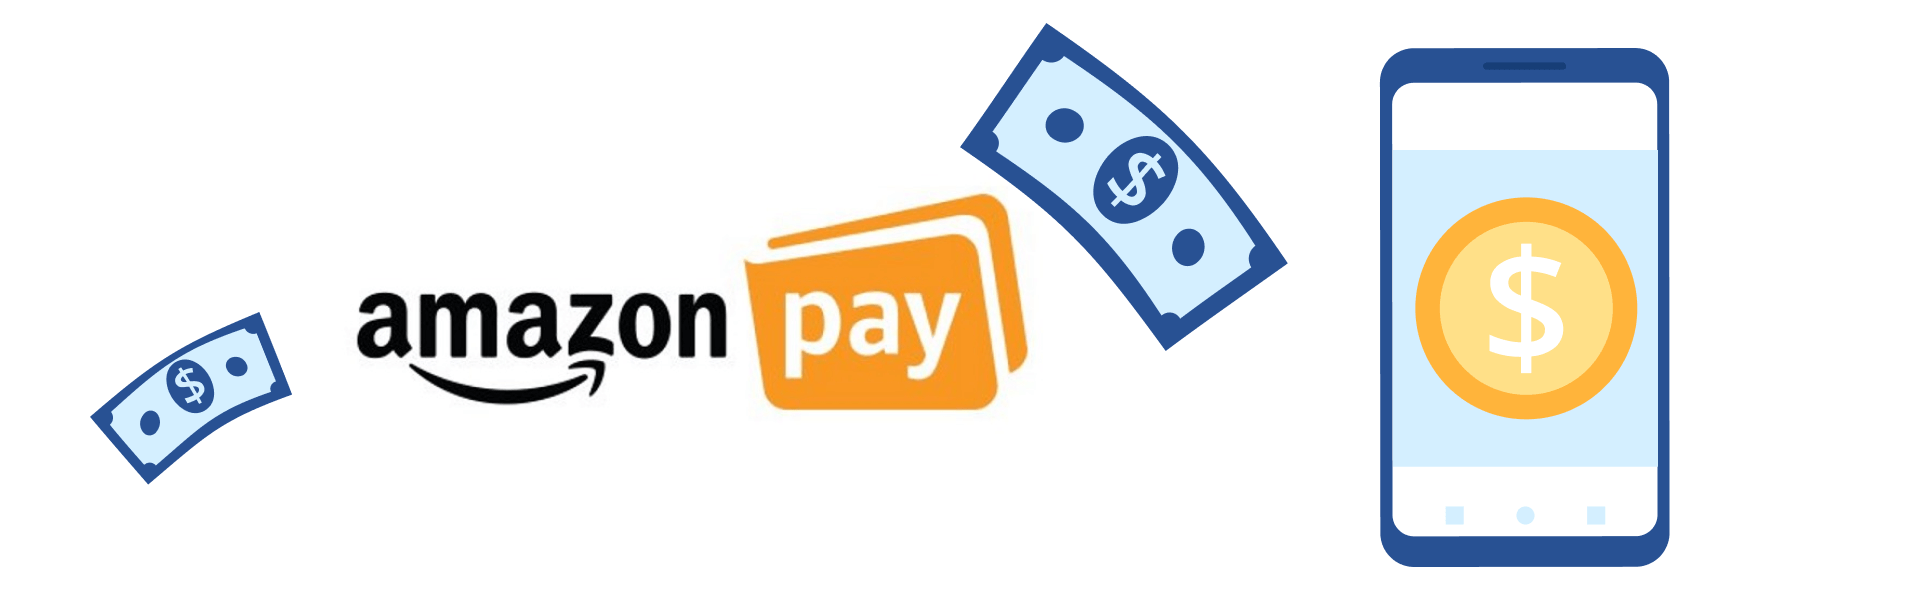 Amazon Pay represents one of the best PayPal alternatives for business.